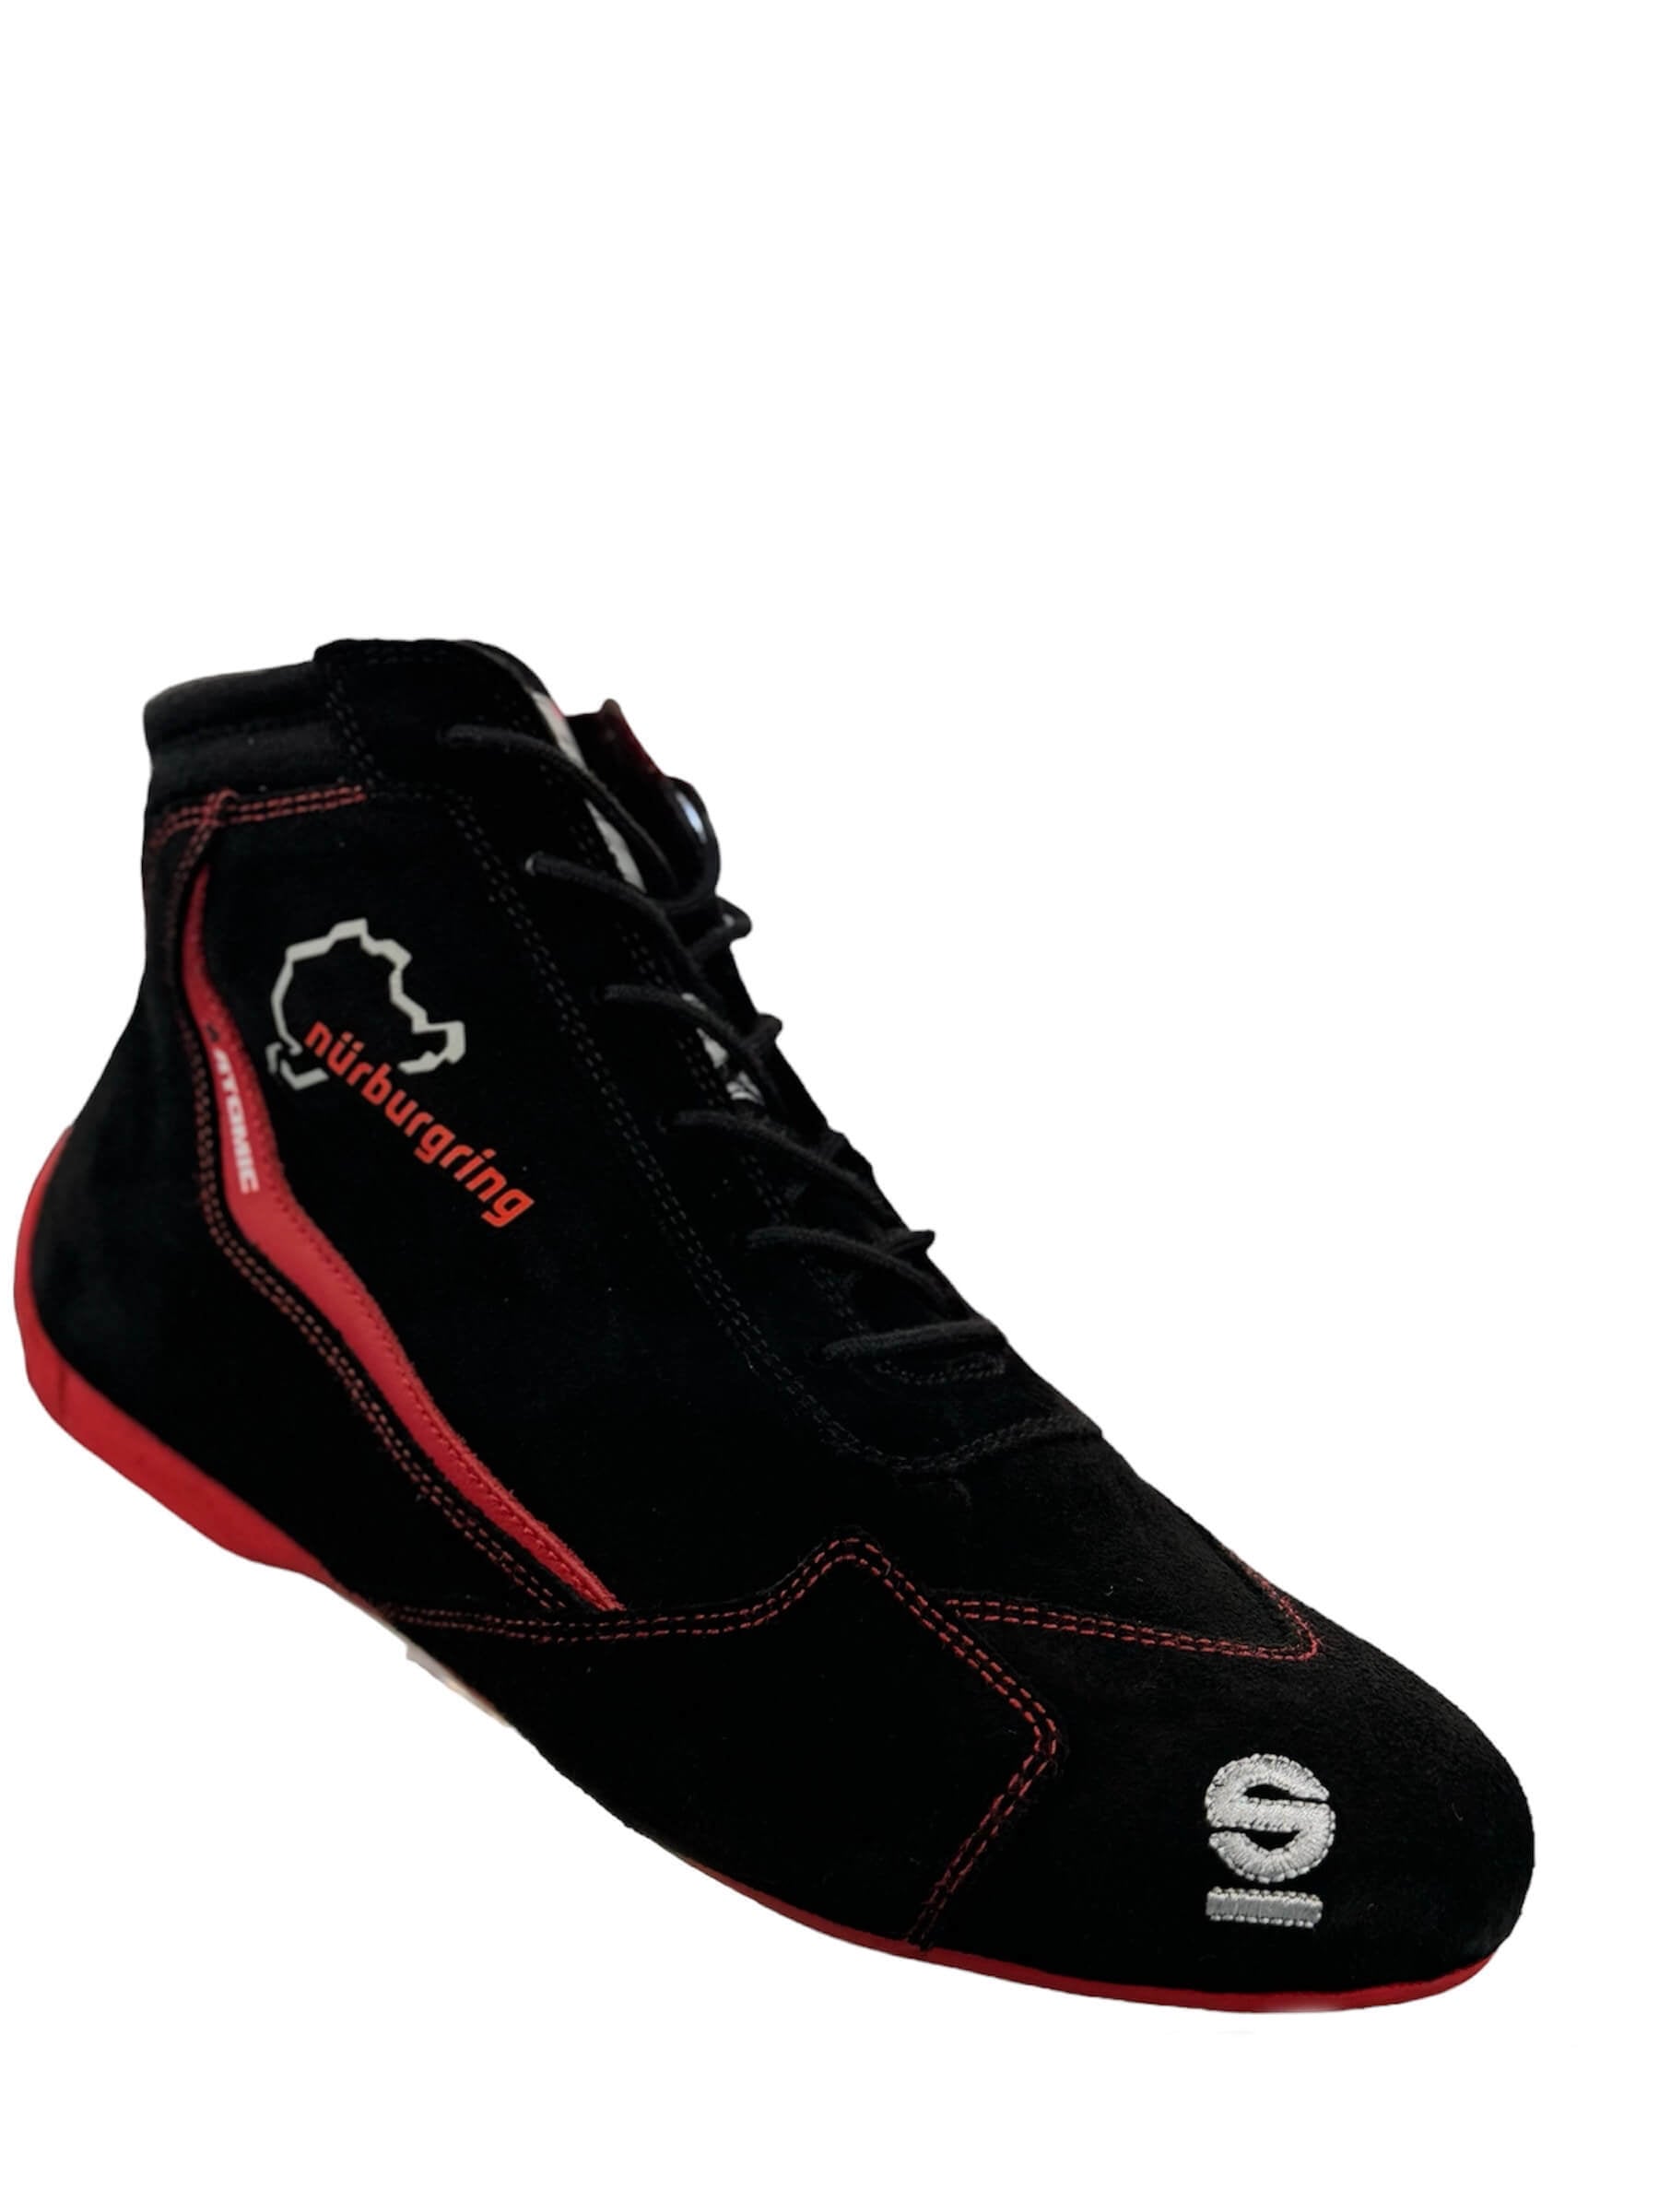 SPARCO 001295SP_NBR42 Shoes Slalom Nurburgring Edition black/red Size 42 Photo-0 